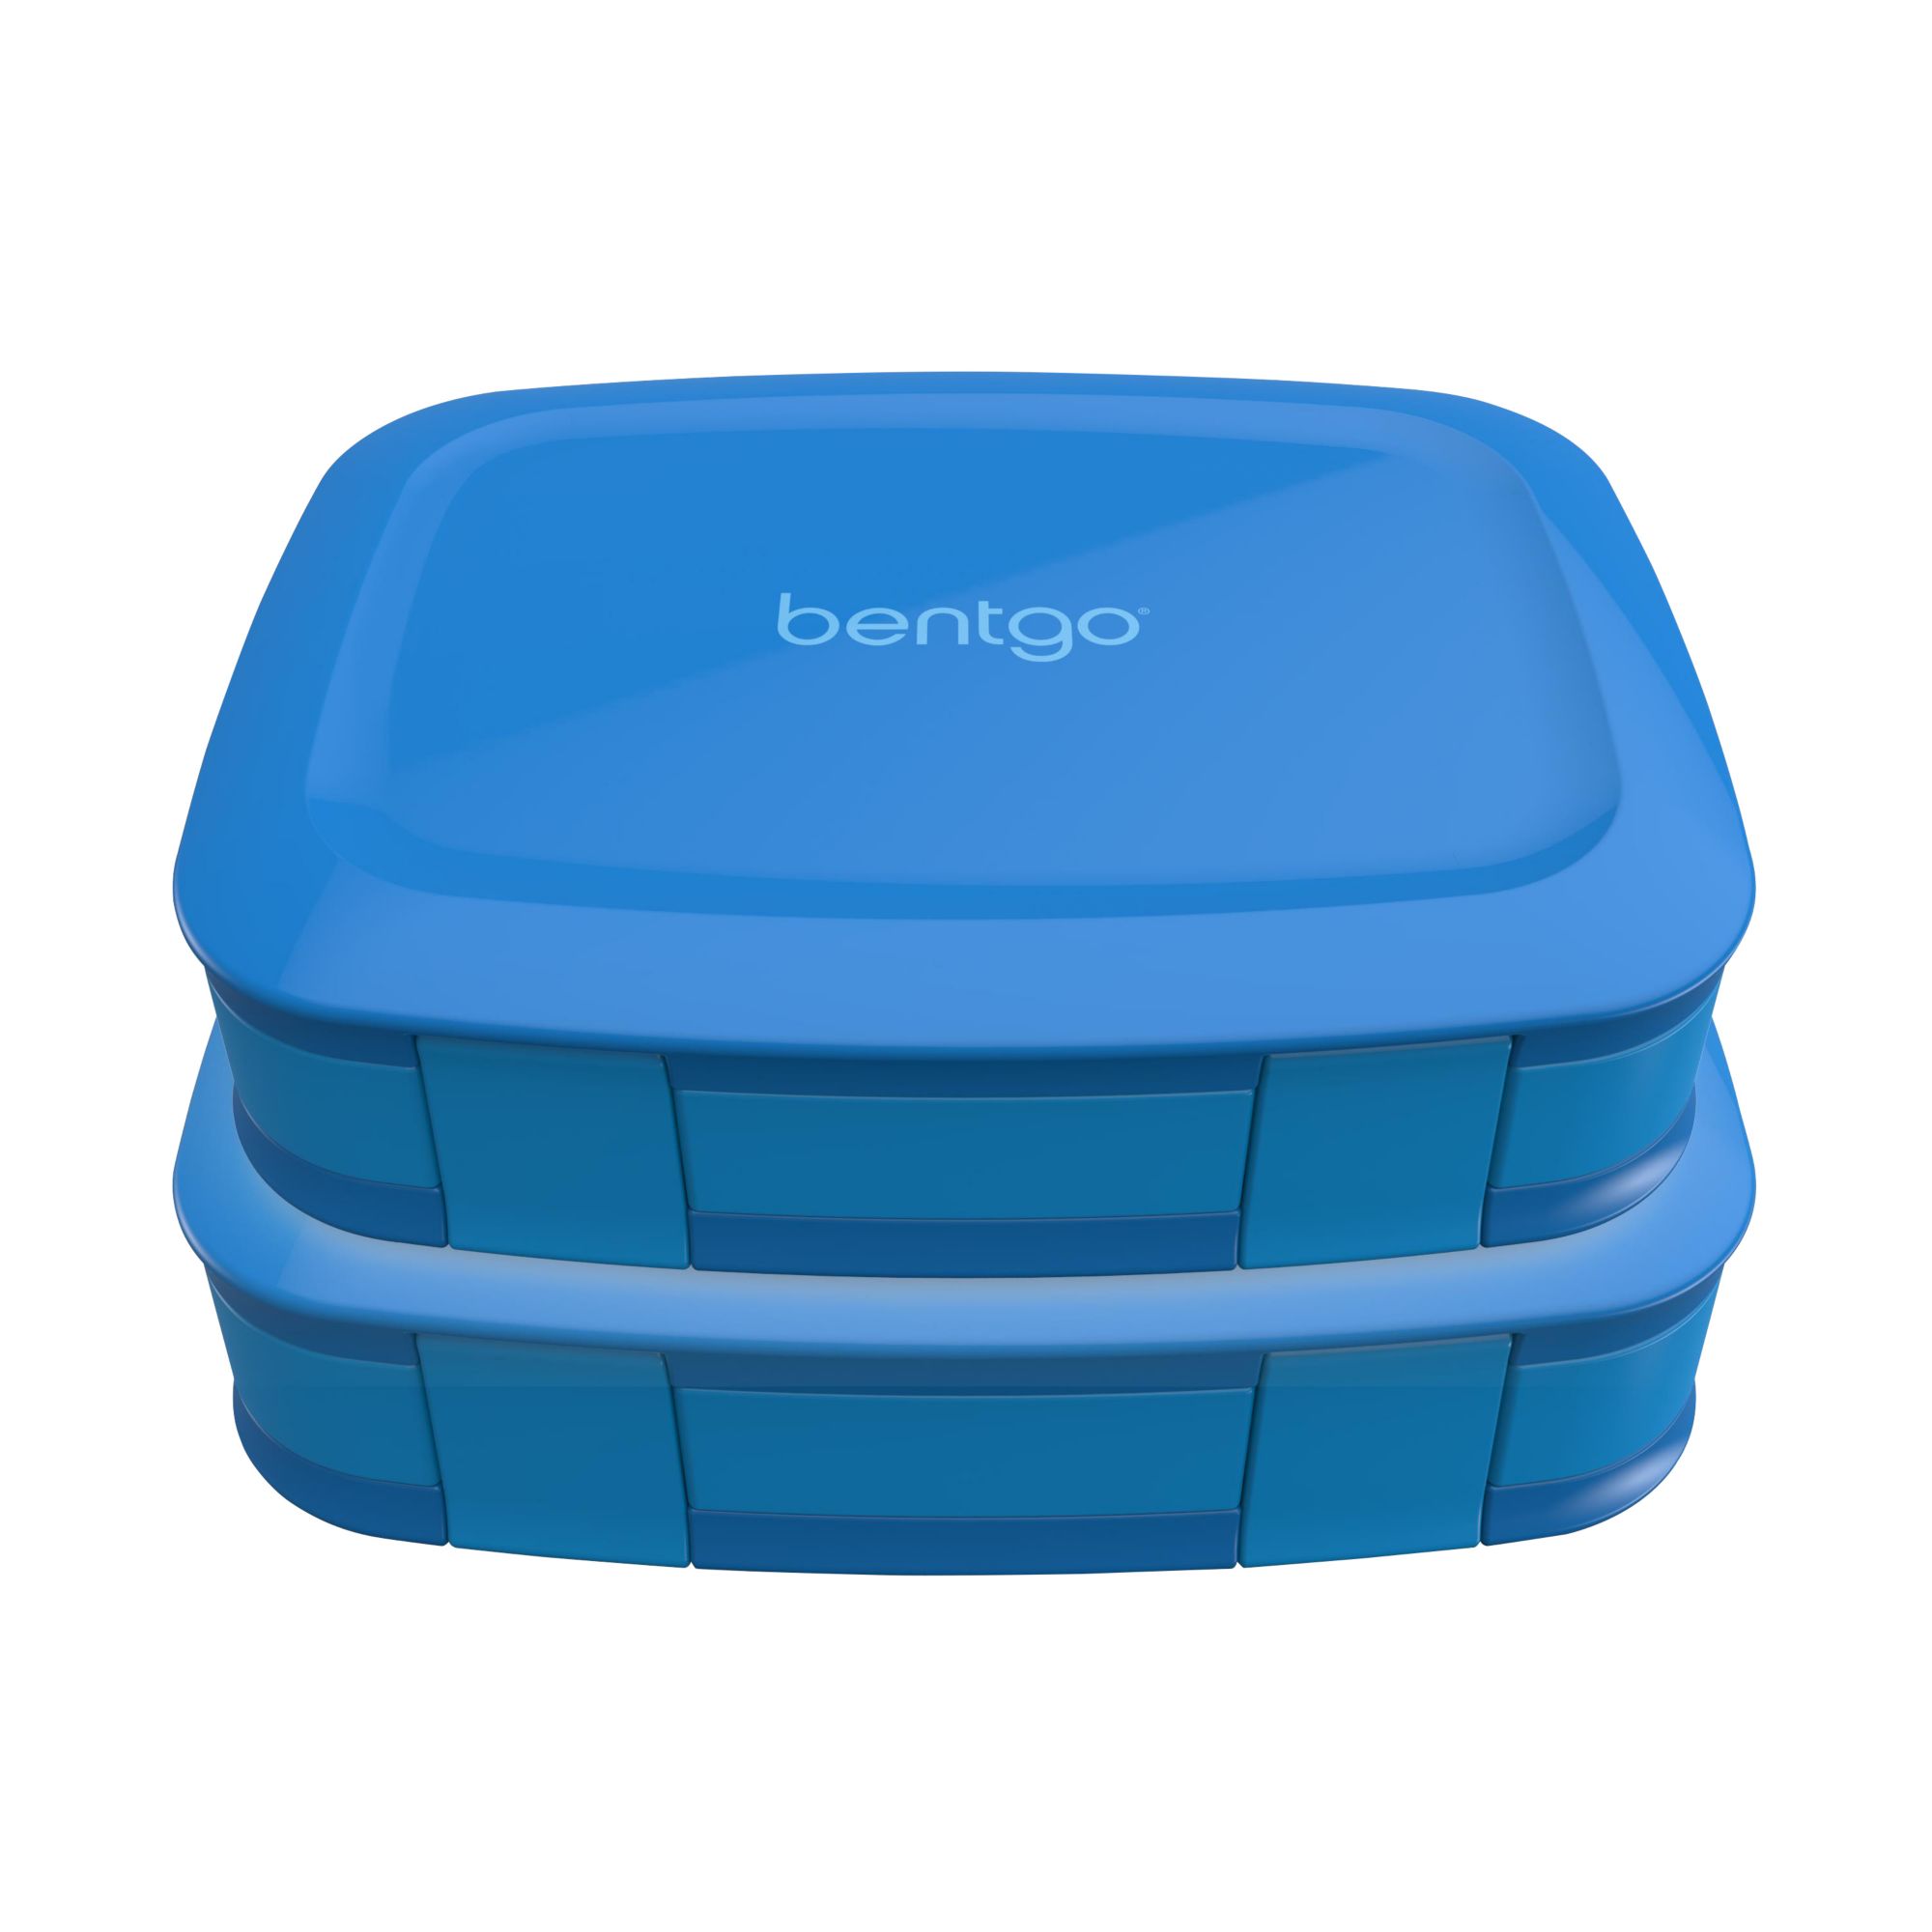 Bentgo 2pc Glass Meal Prep Container Set White Stone : Target